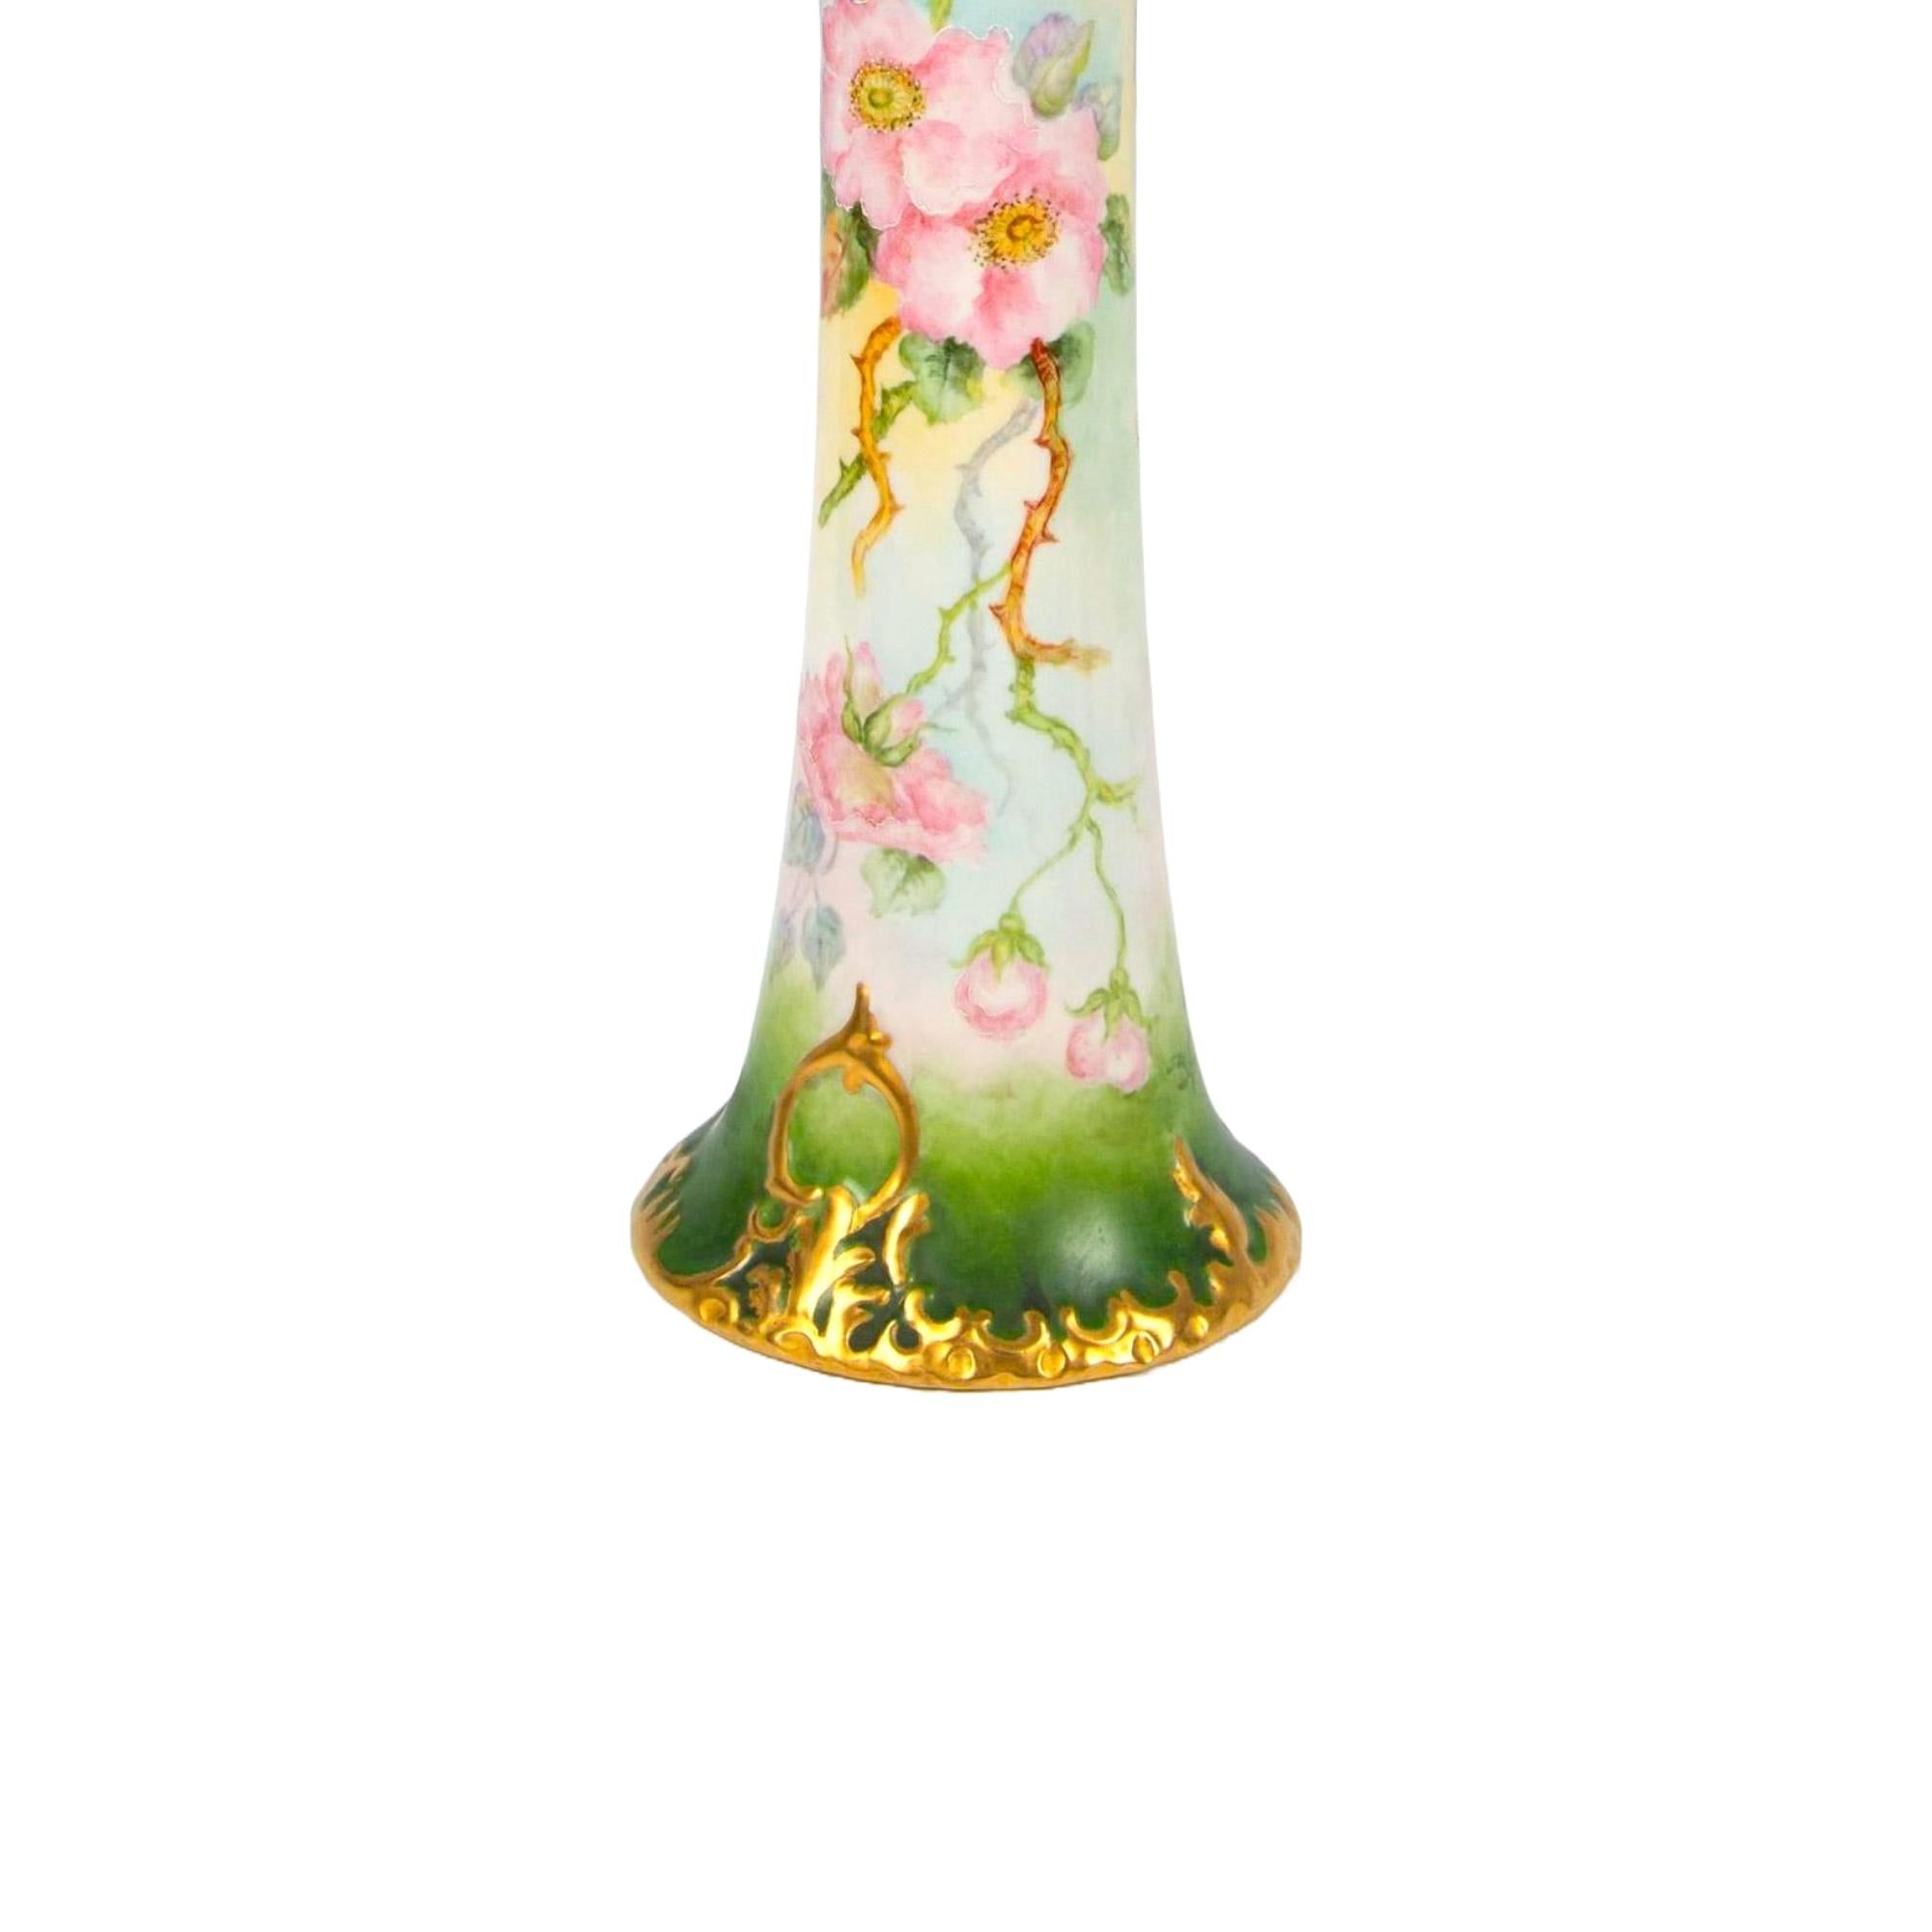 Antique Hand-painted & Gilt Decorated Tall Porcelain Rose Vase / Belleek Willets In Good Condition For Sale In Tarry Town, NY